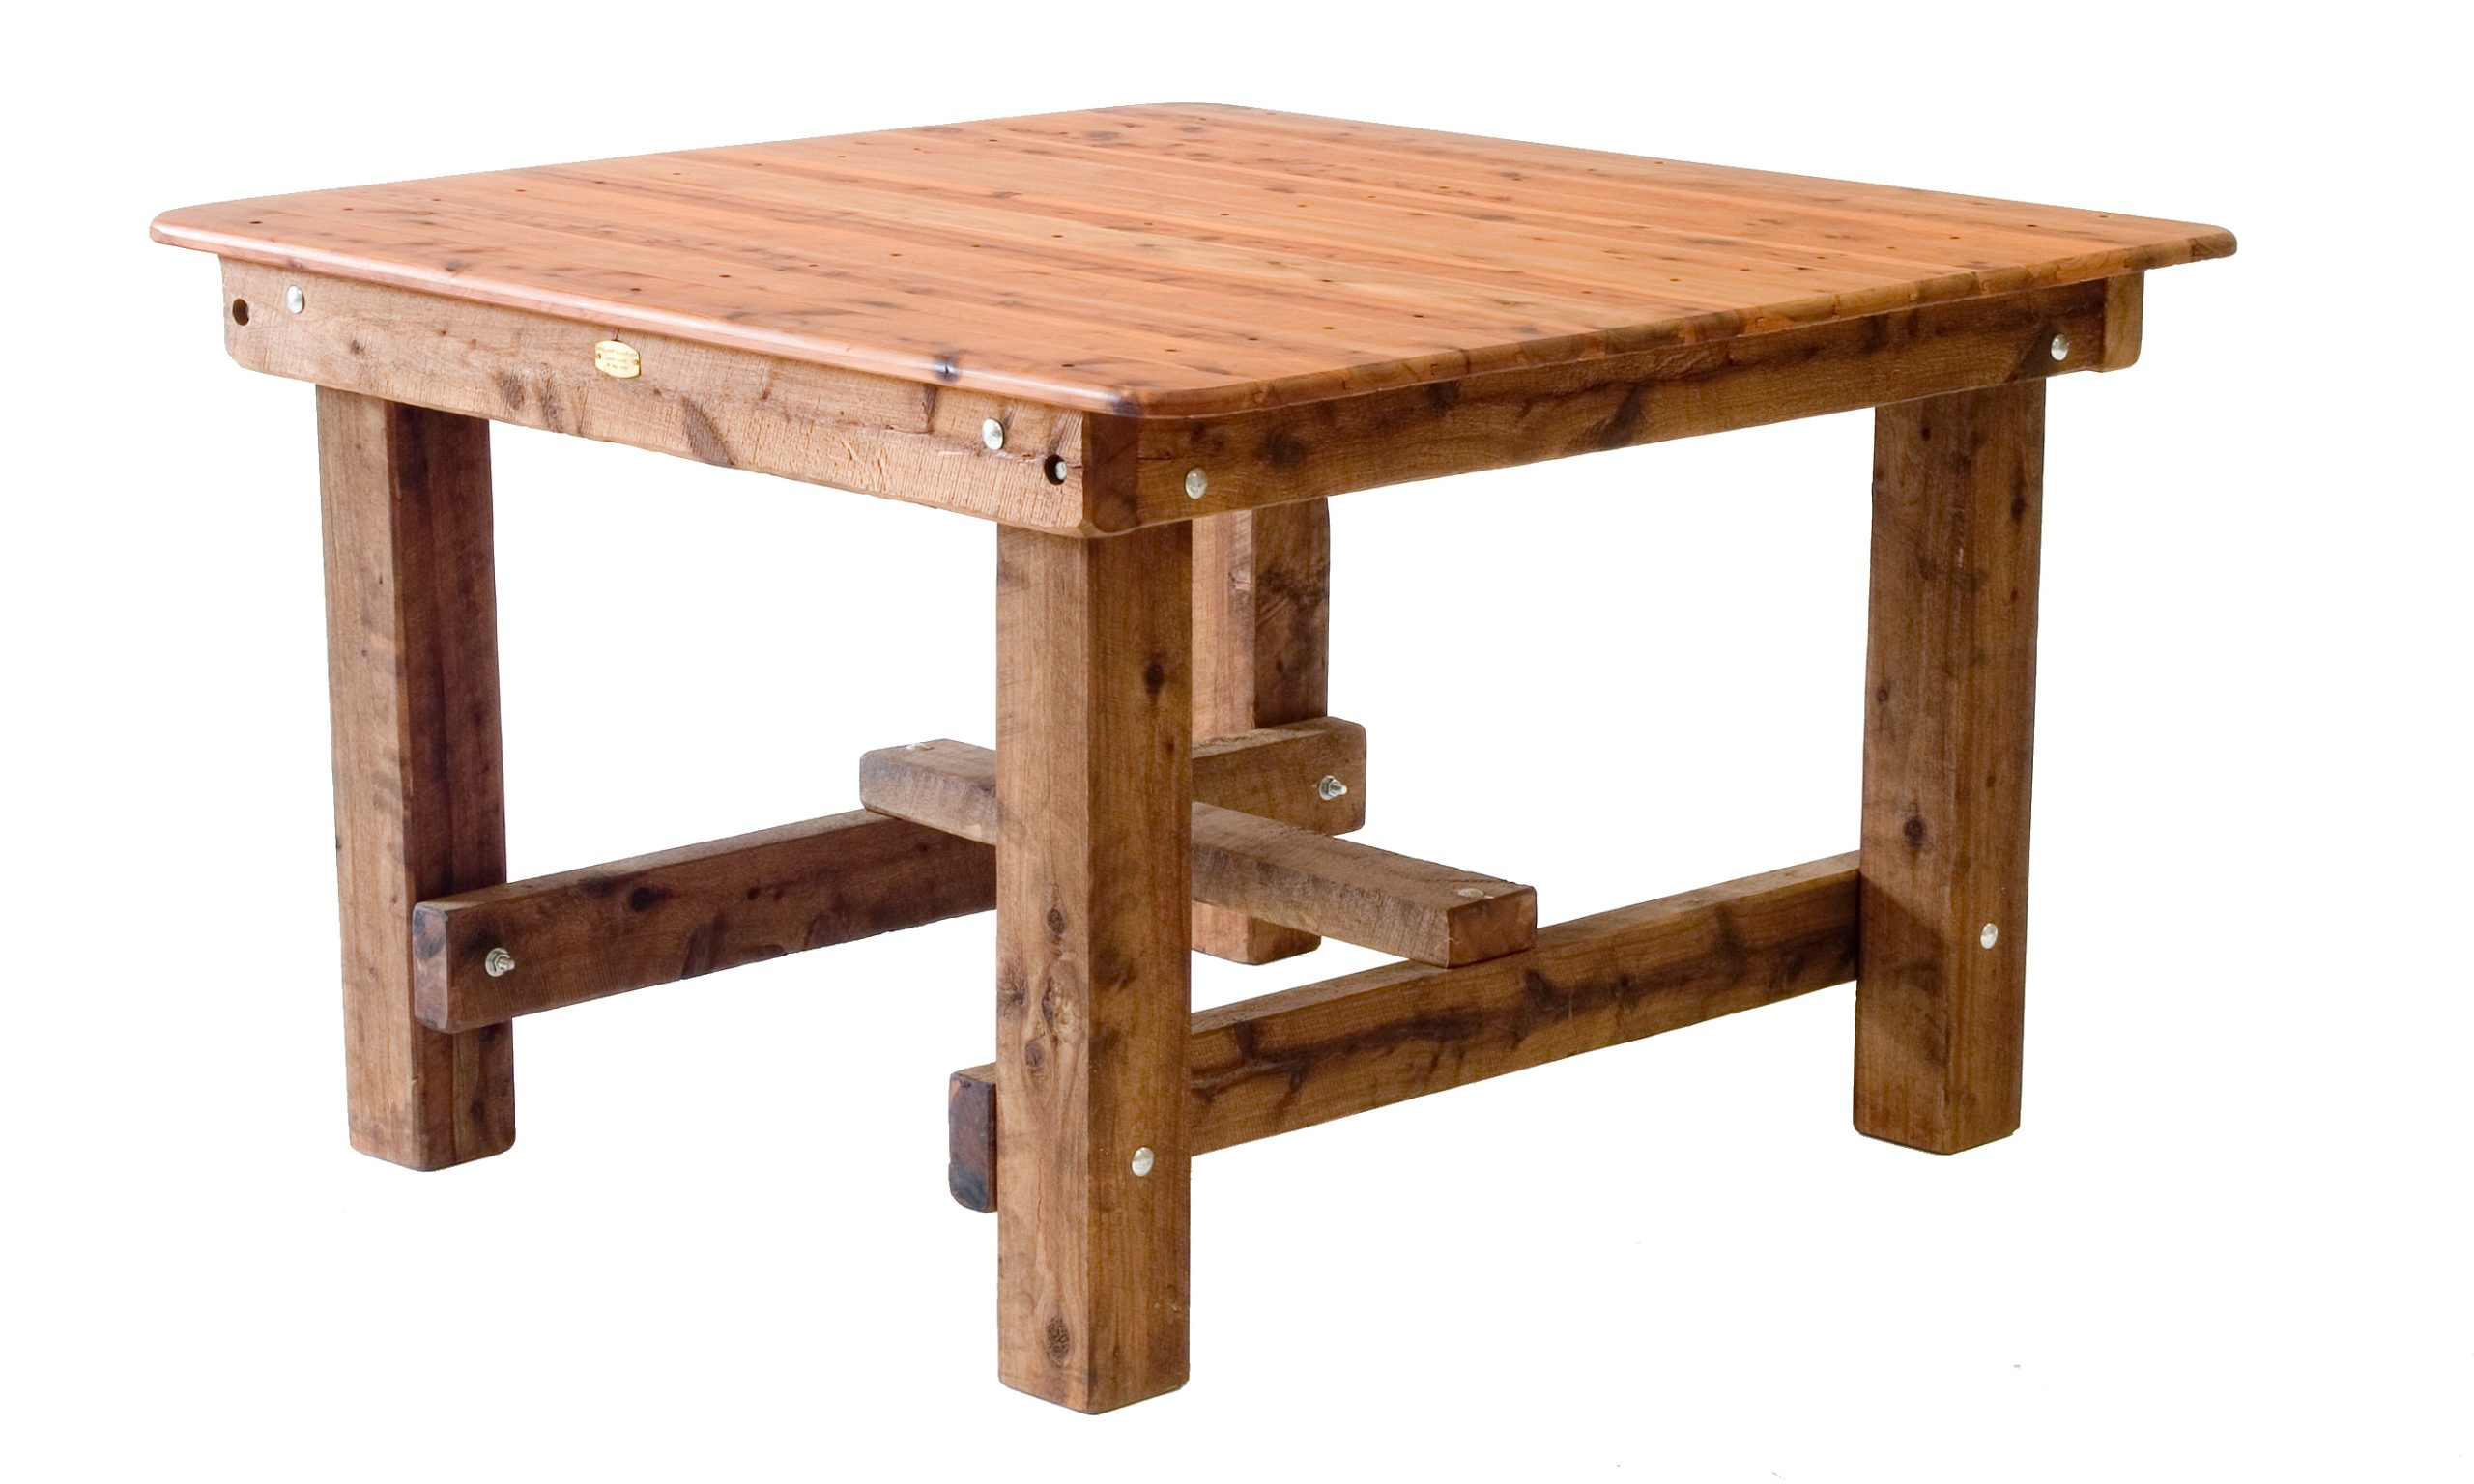 Square Southport 1200mm Cypress outdoor timber table square legs available to order now